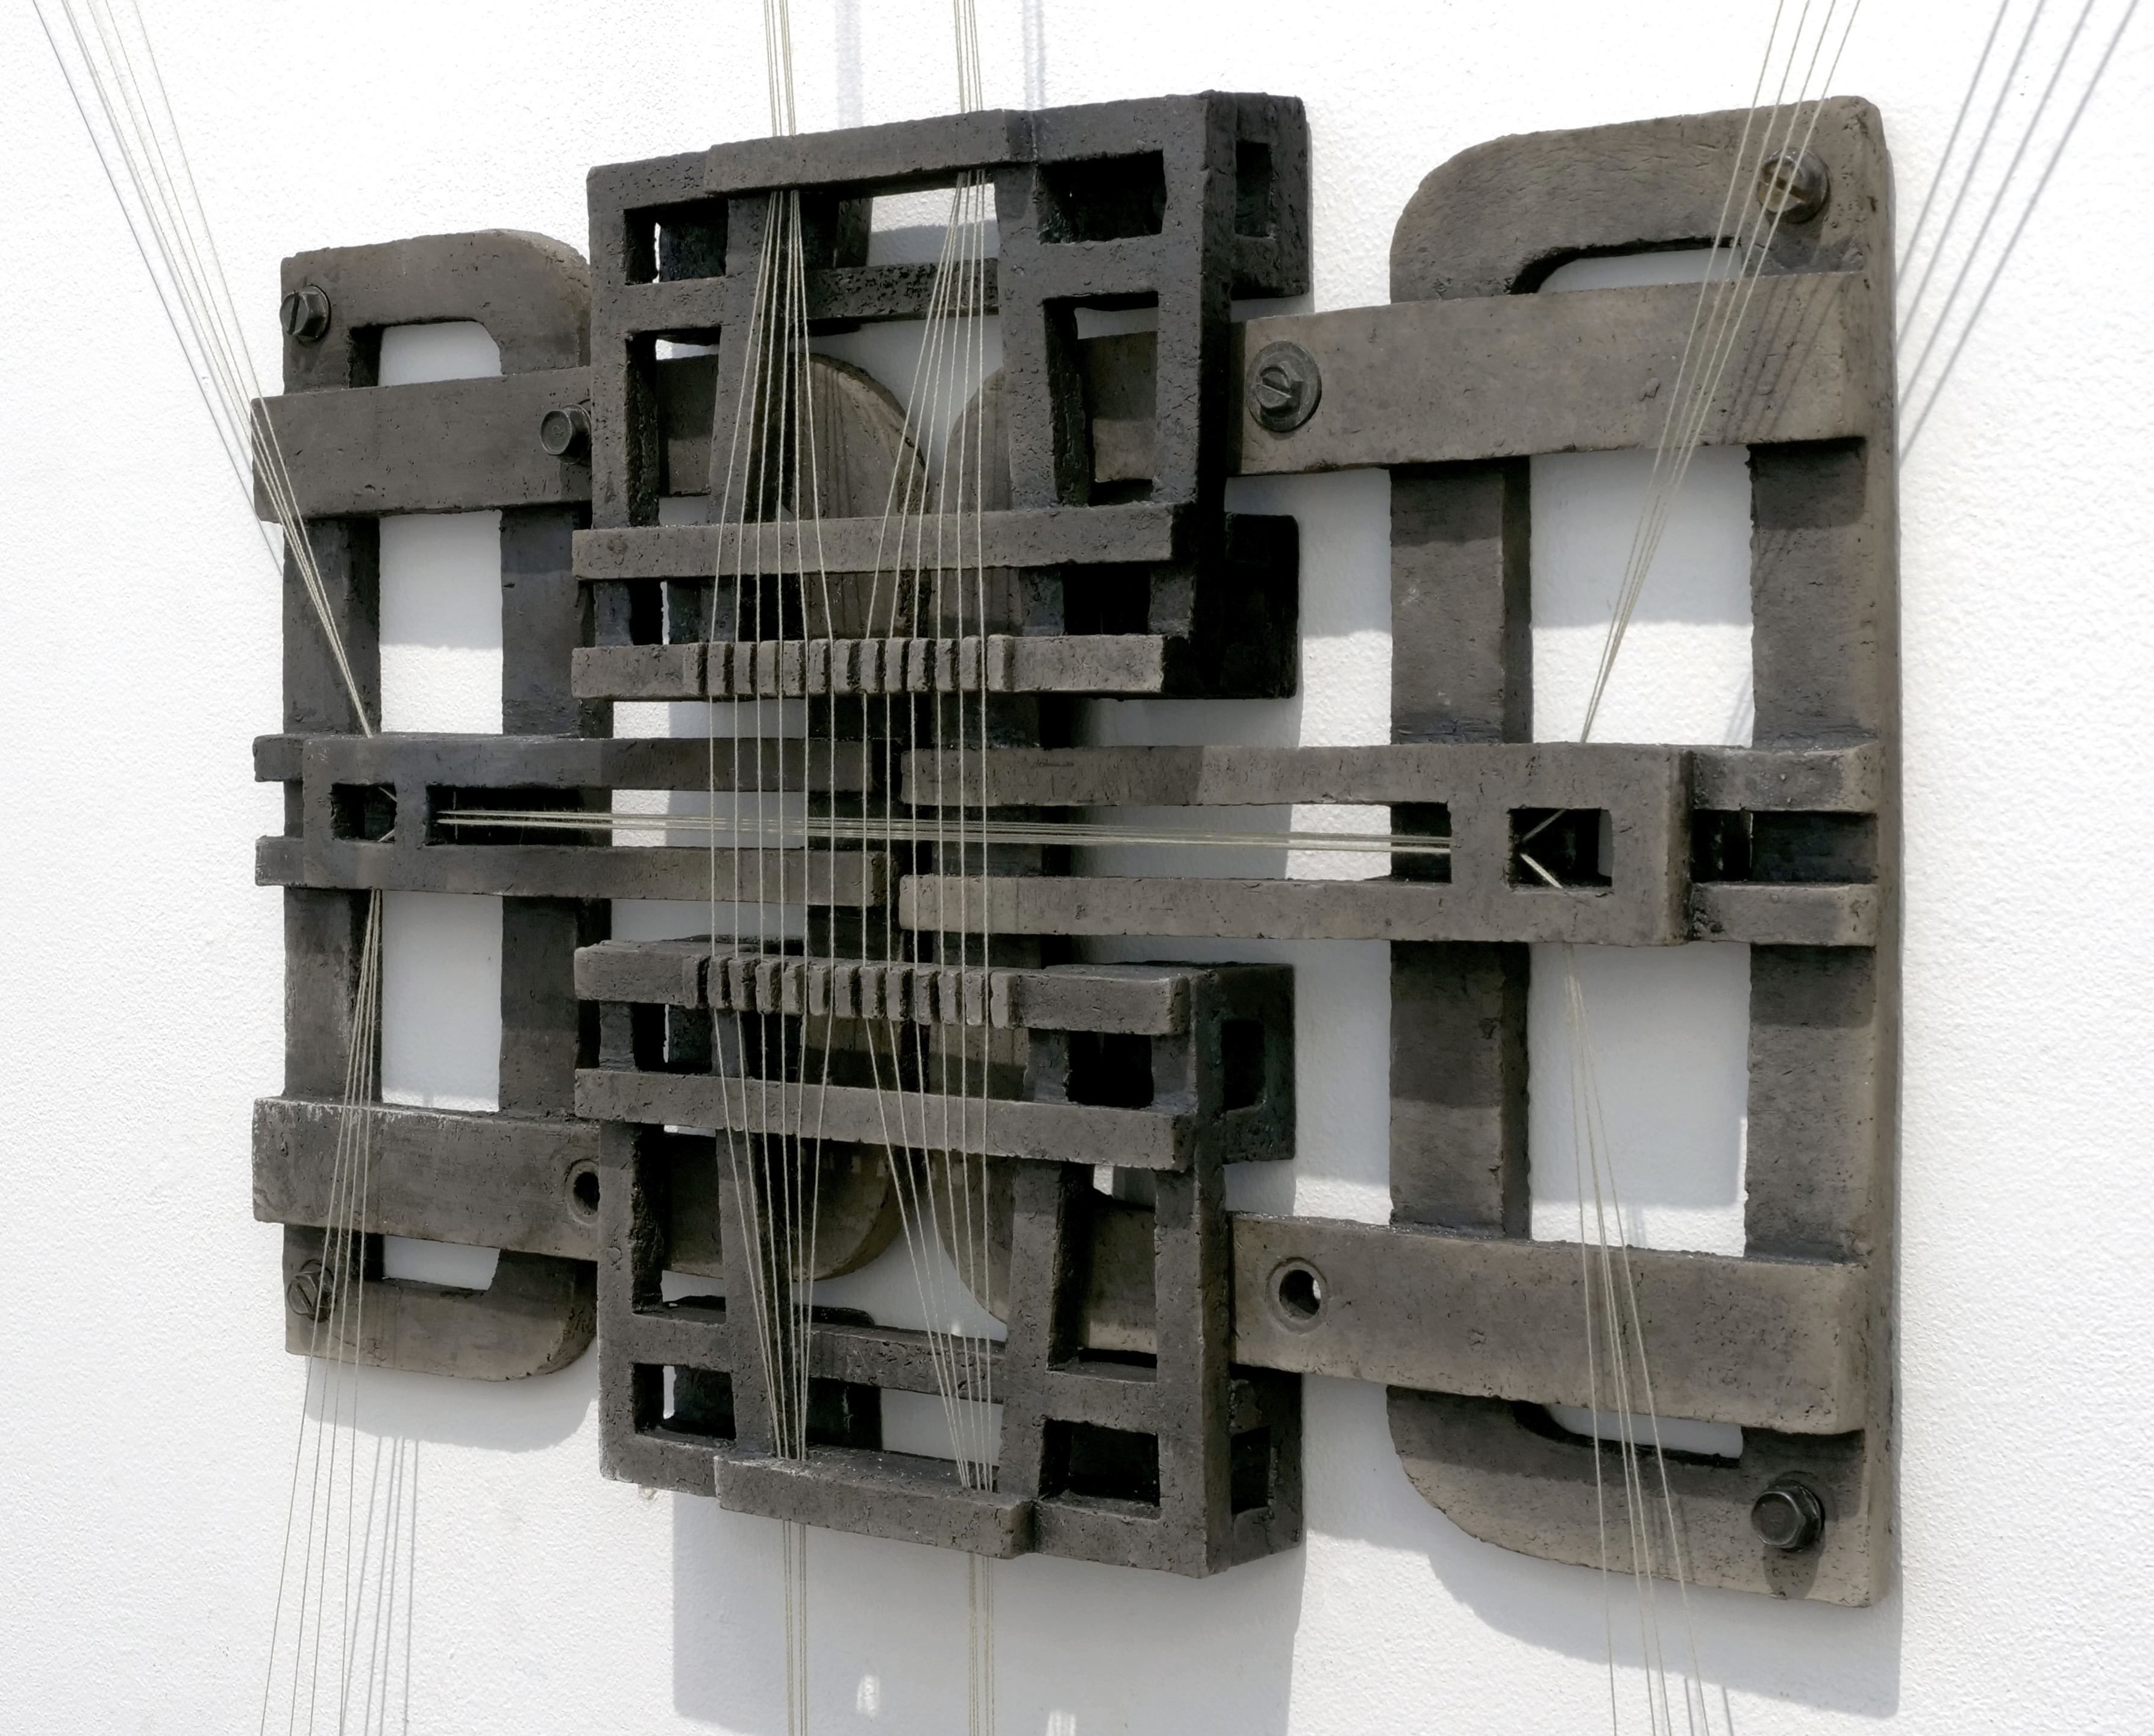 This is a wall mounted sculpture made of dark gray matte fired ceramic. The pieces appear to be part of industrial machinery with bolts fastening them together and white strings running through them at precise intervals.